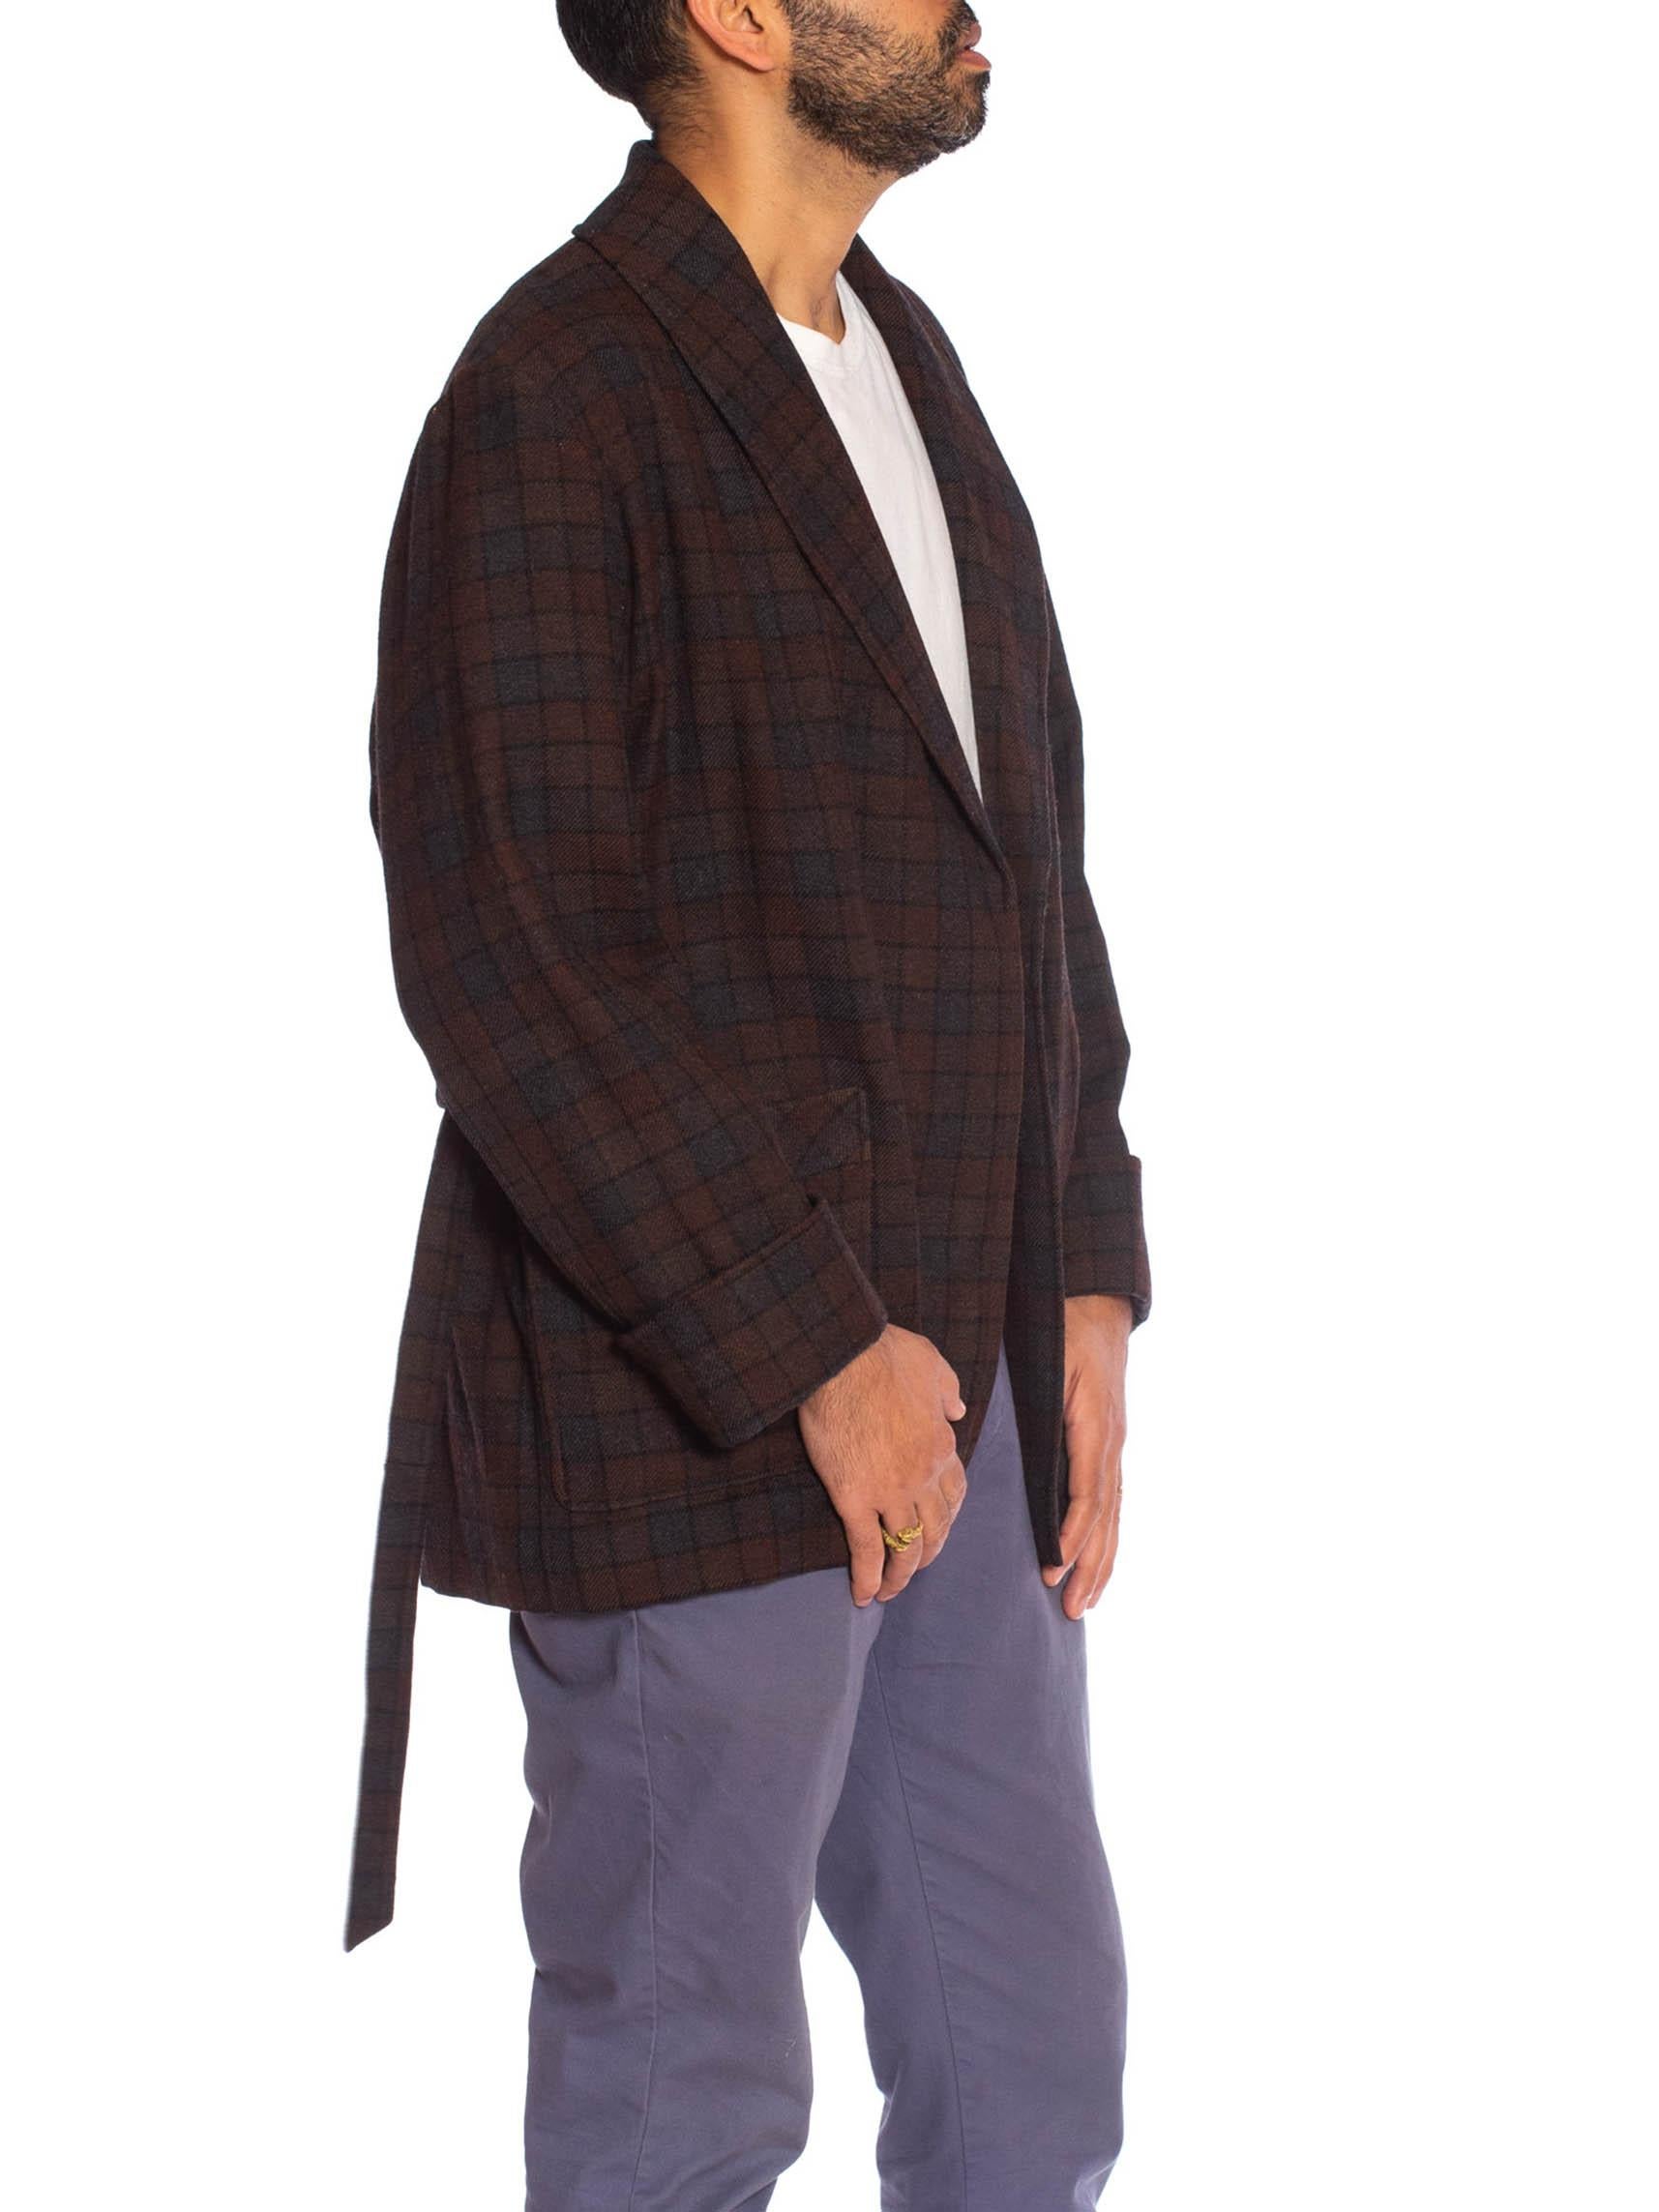 1920S Brown & Grey Wool Plaid Men's At Home Smoking Jacket For Sale 3